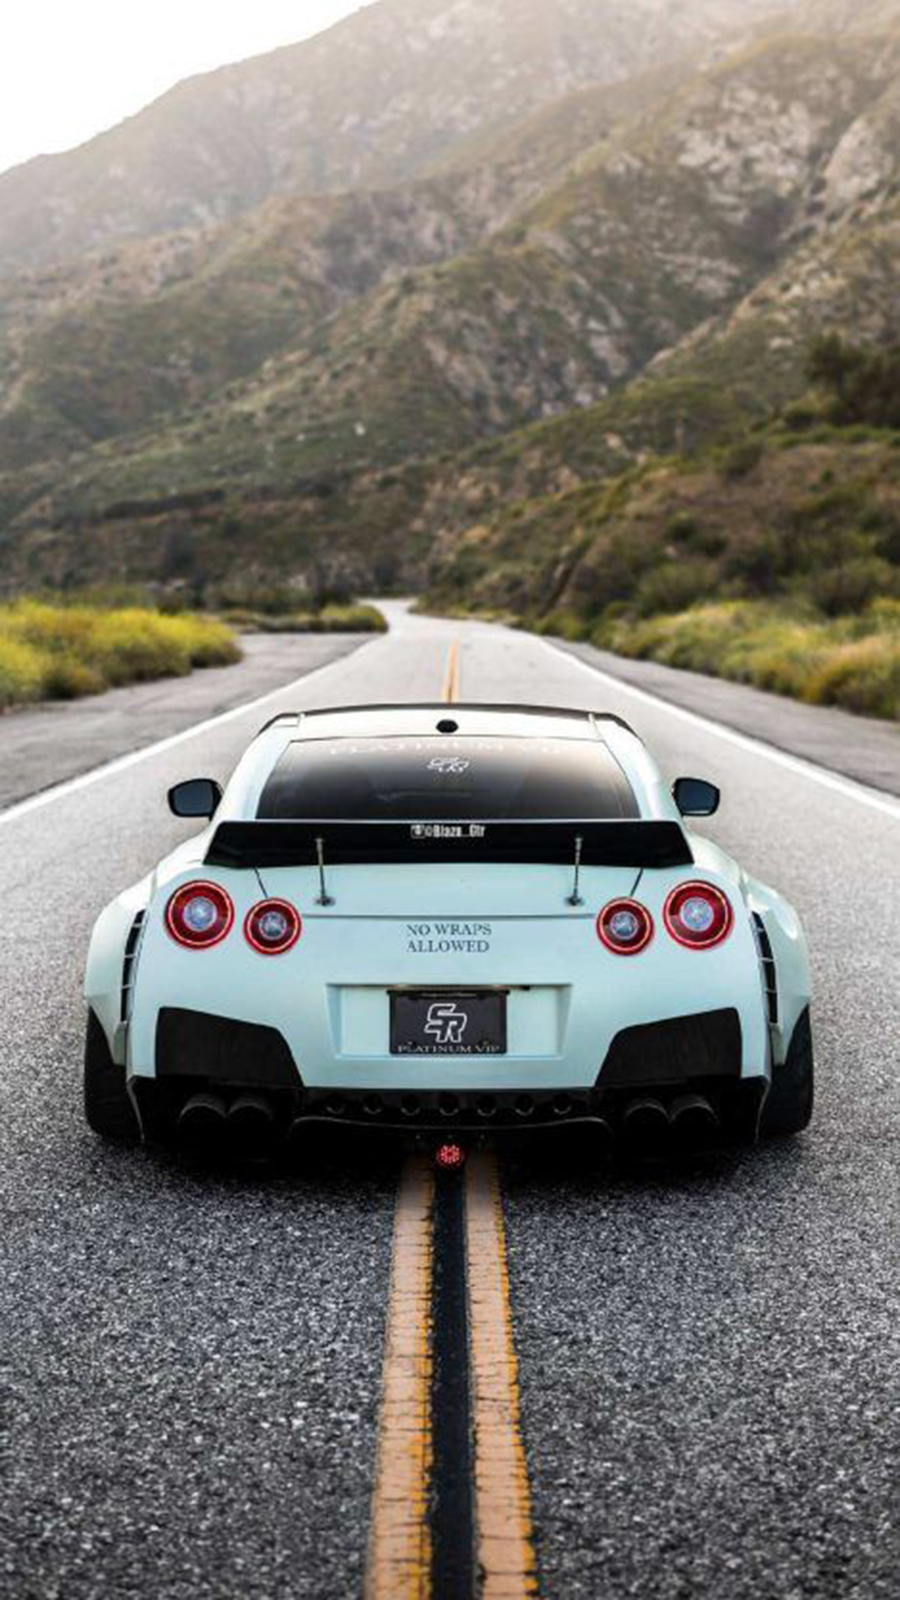 Nissan Cars Wallpapers For Mobile Free Download Best Wallpapers Best Wallpapers